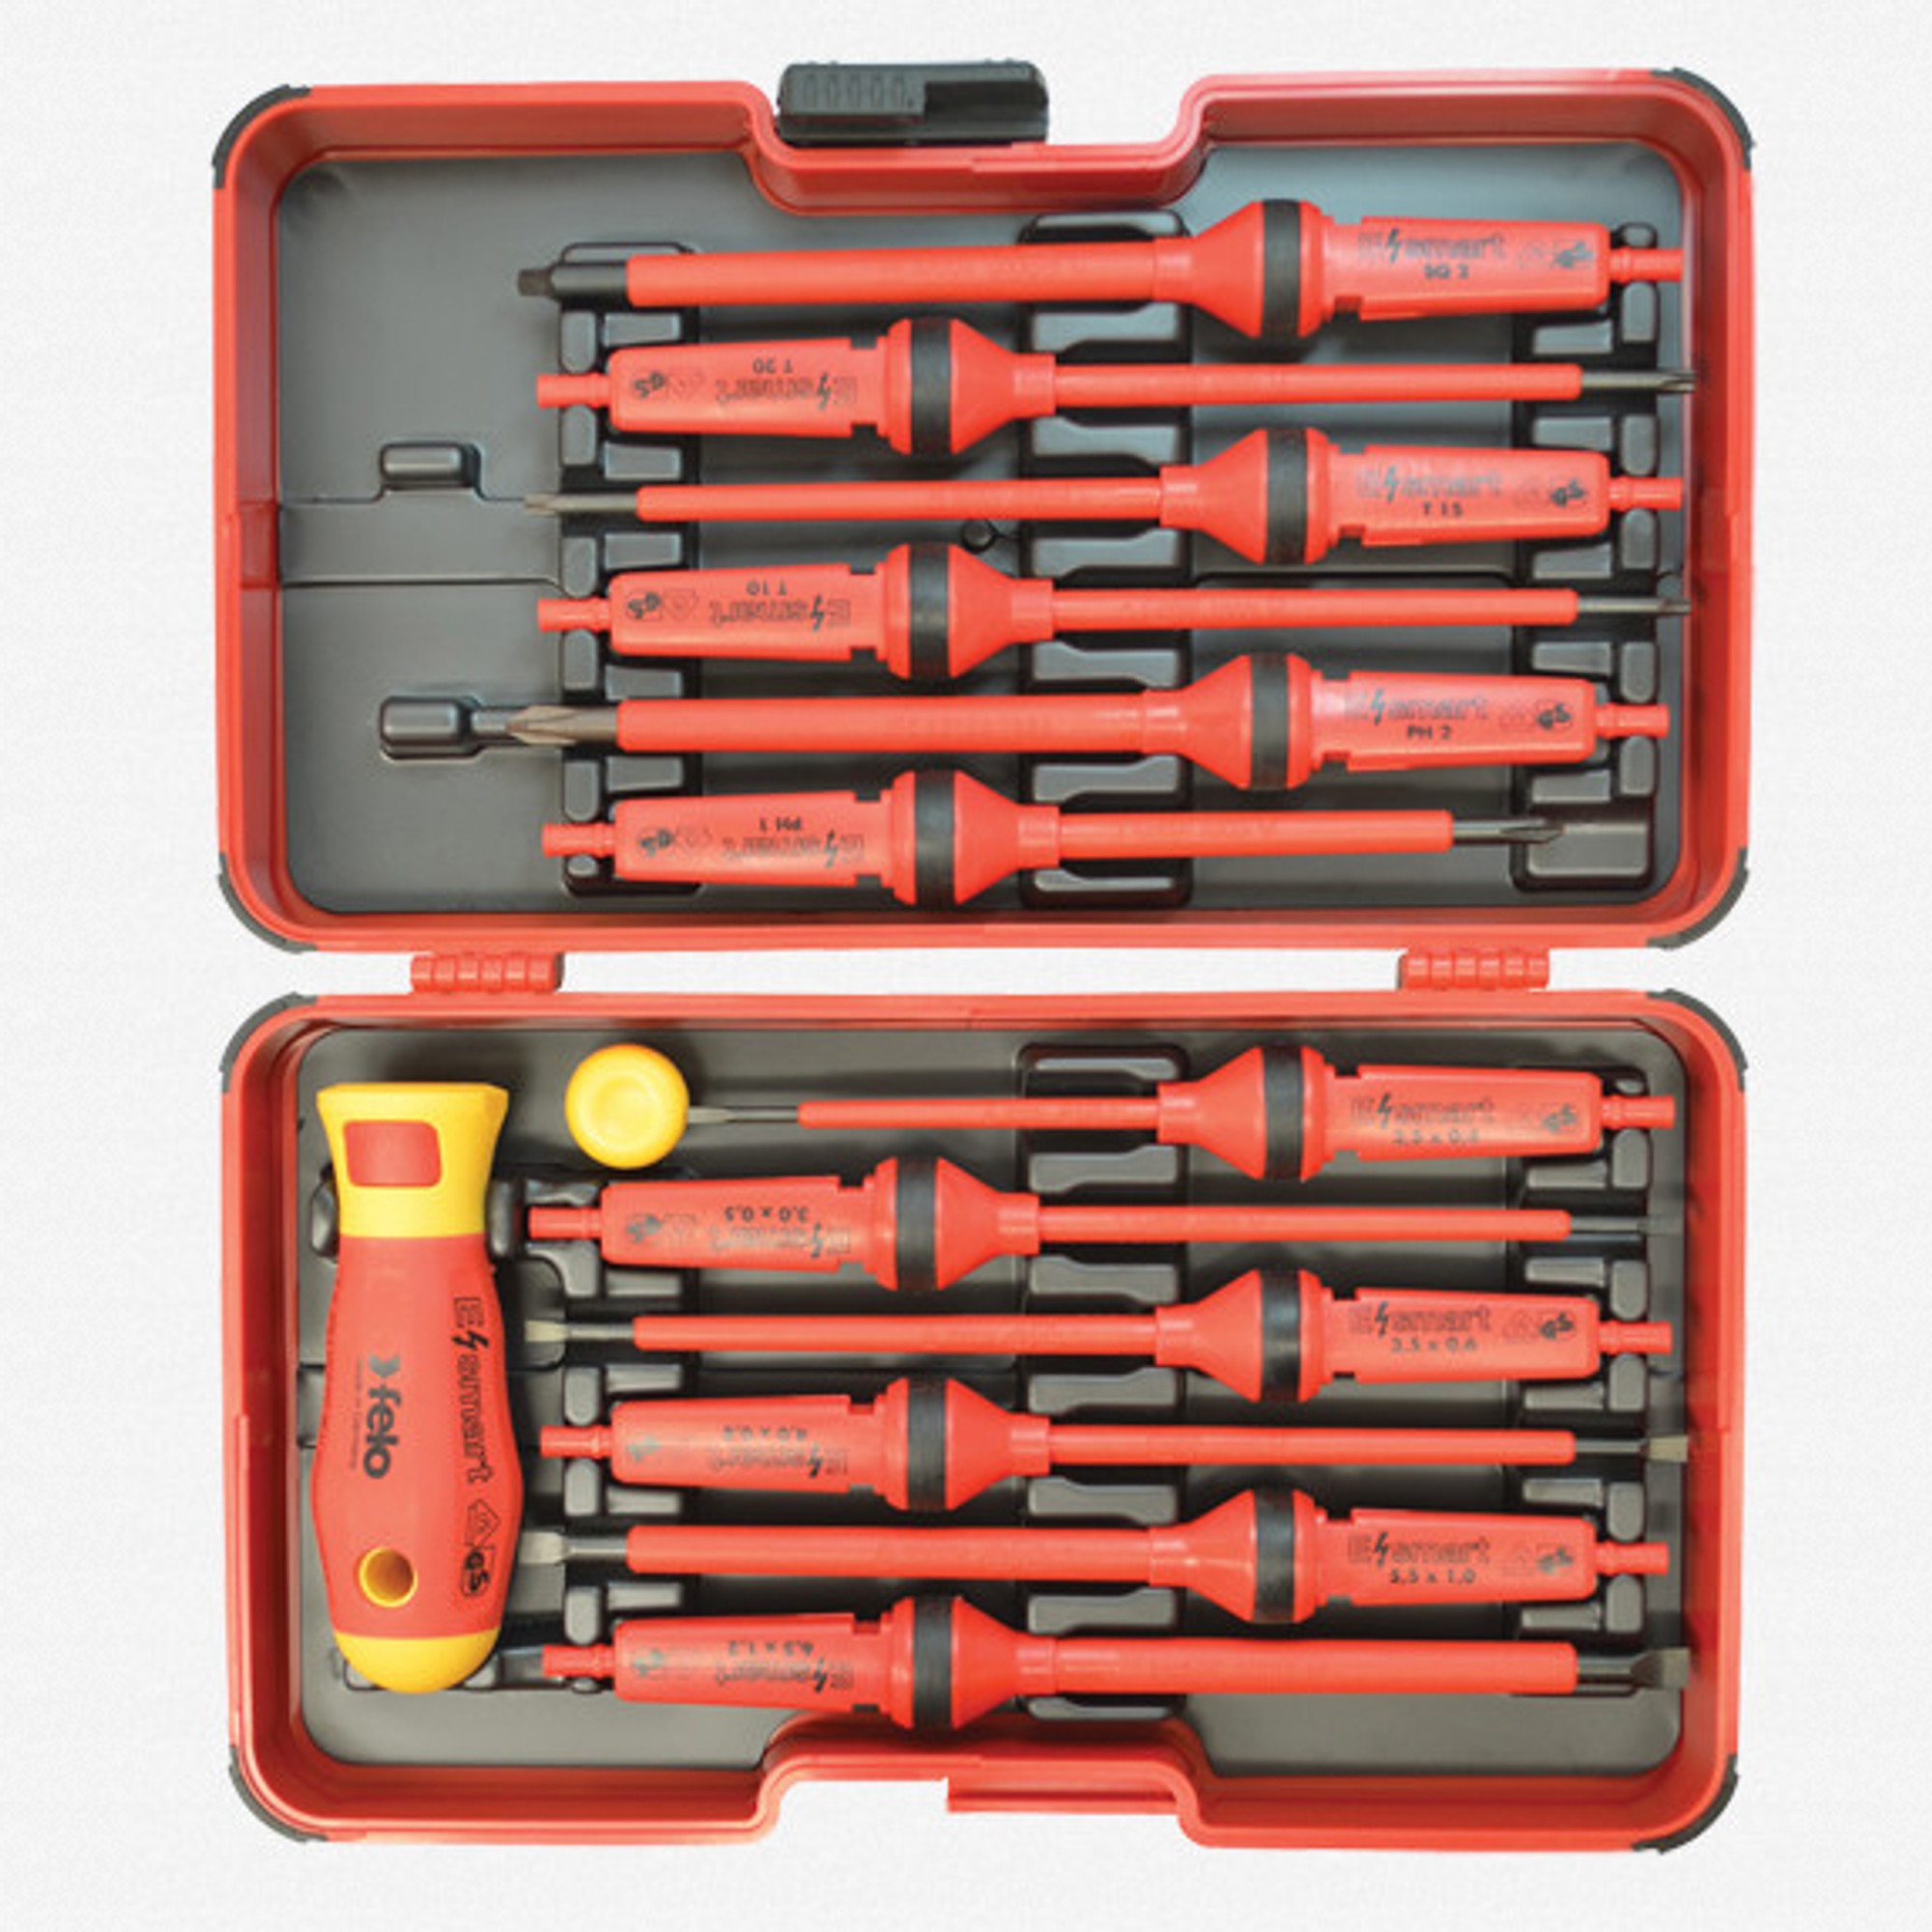 Felo 53439 E-Smart 14 piece Square 2 Set - Slotted, Phillips, Square, Torx Tip Insulated Blades with 2 Handles - KC Tool